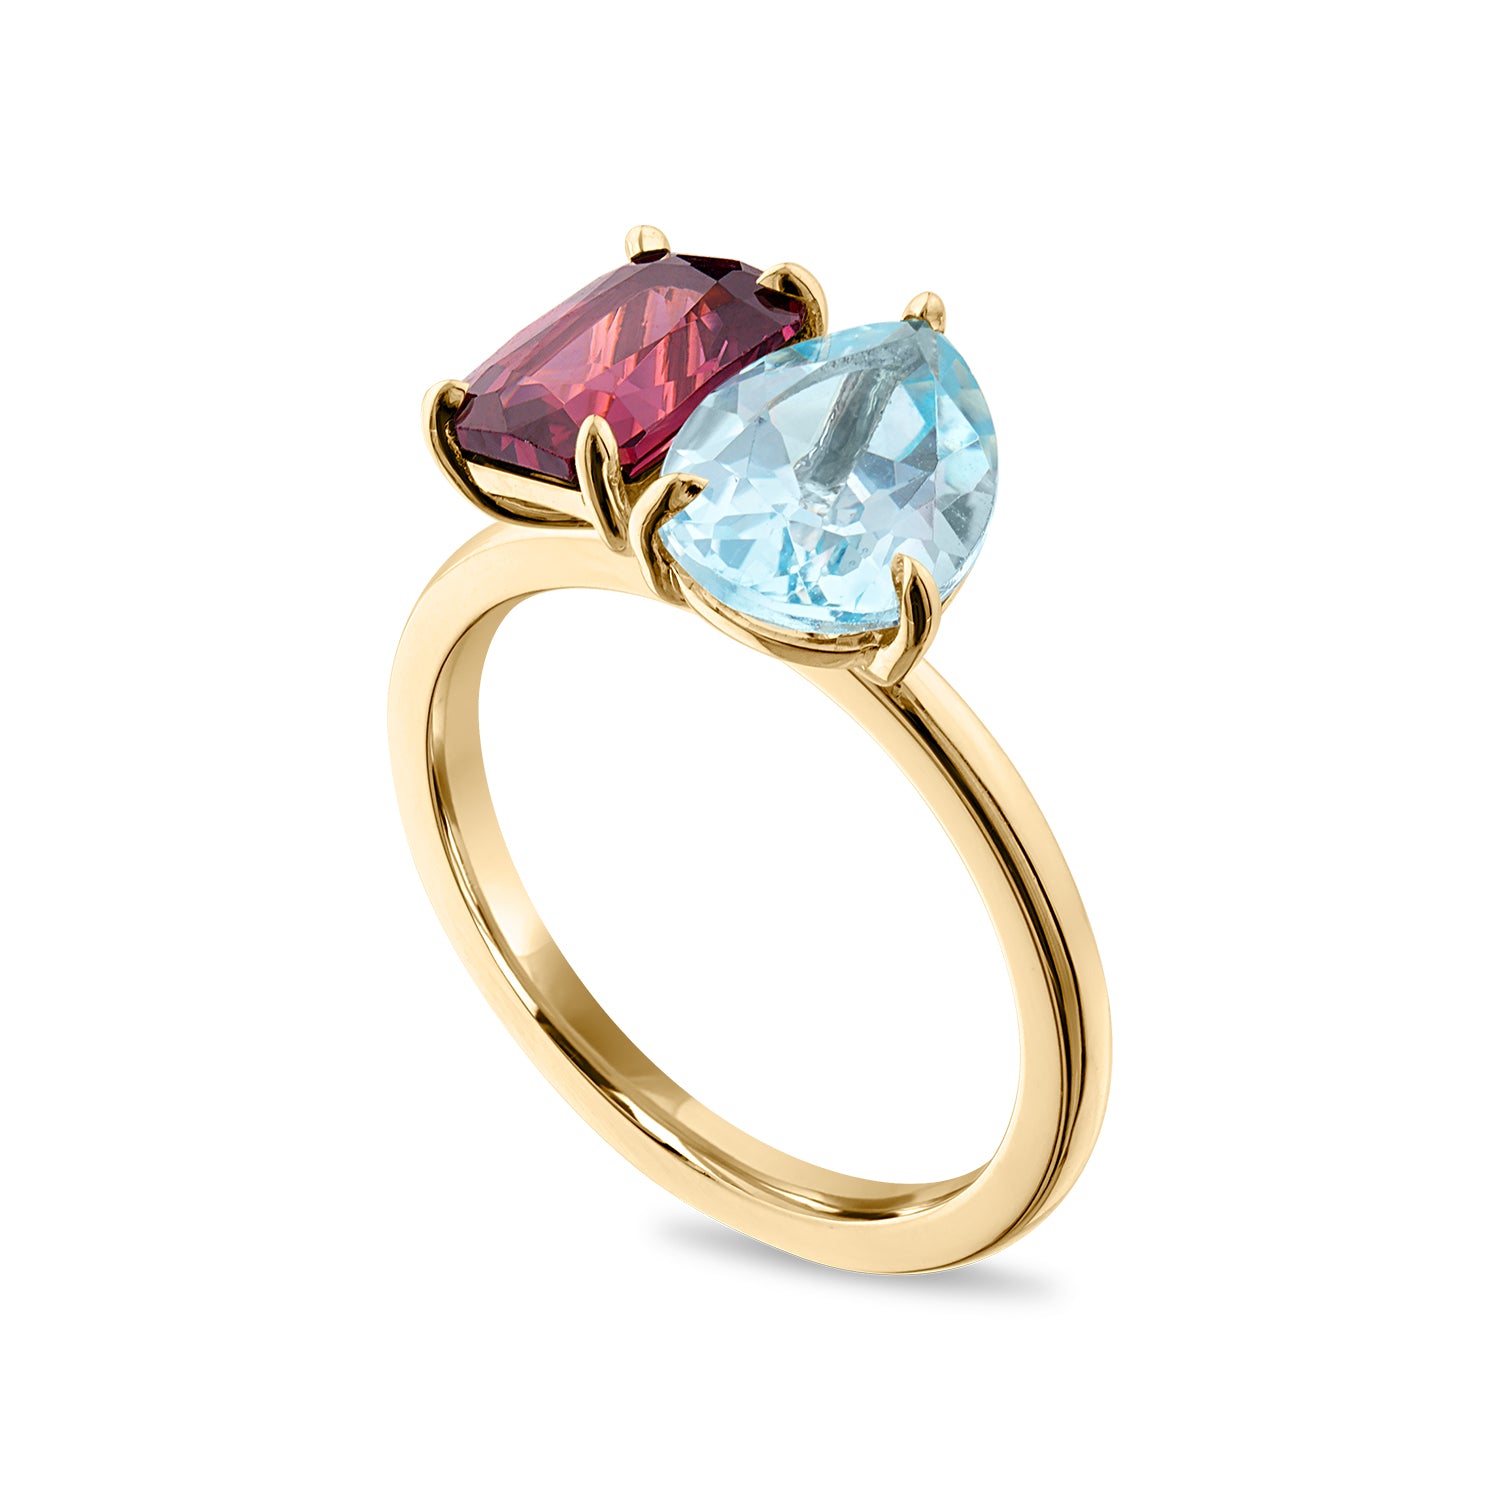 Moi et Toi Style Ring Red Spinel and Blue Topaz